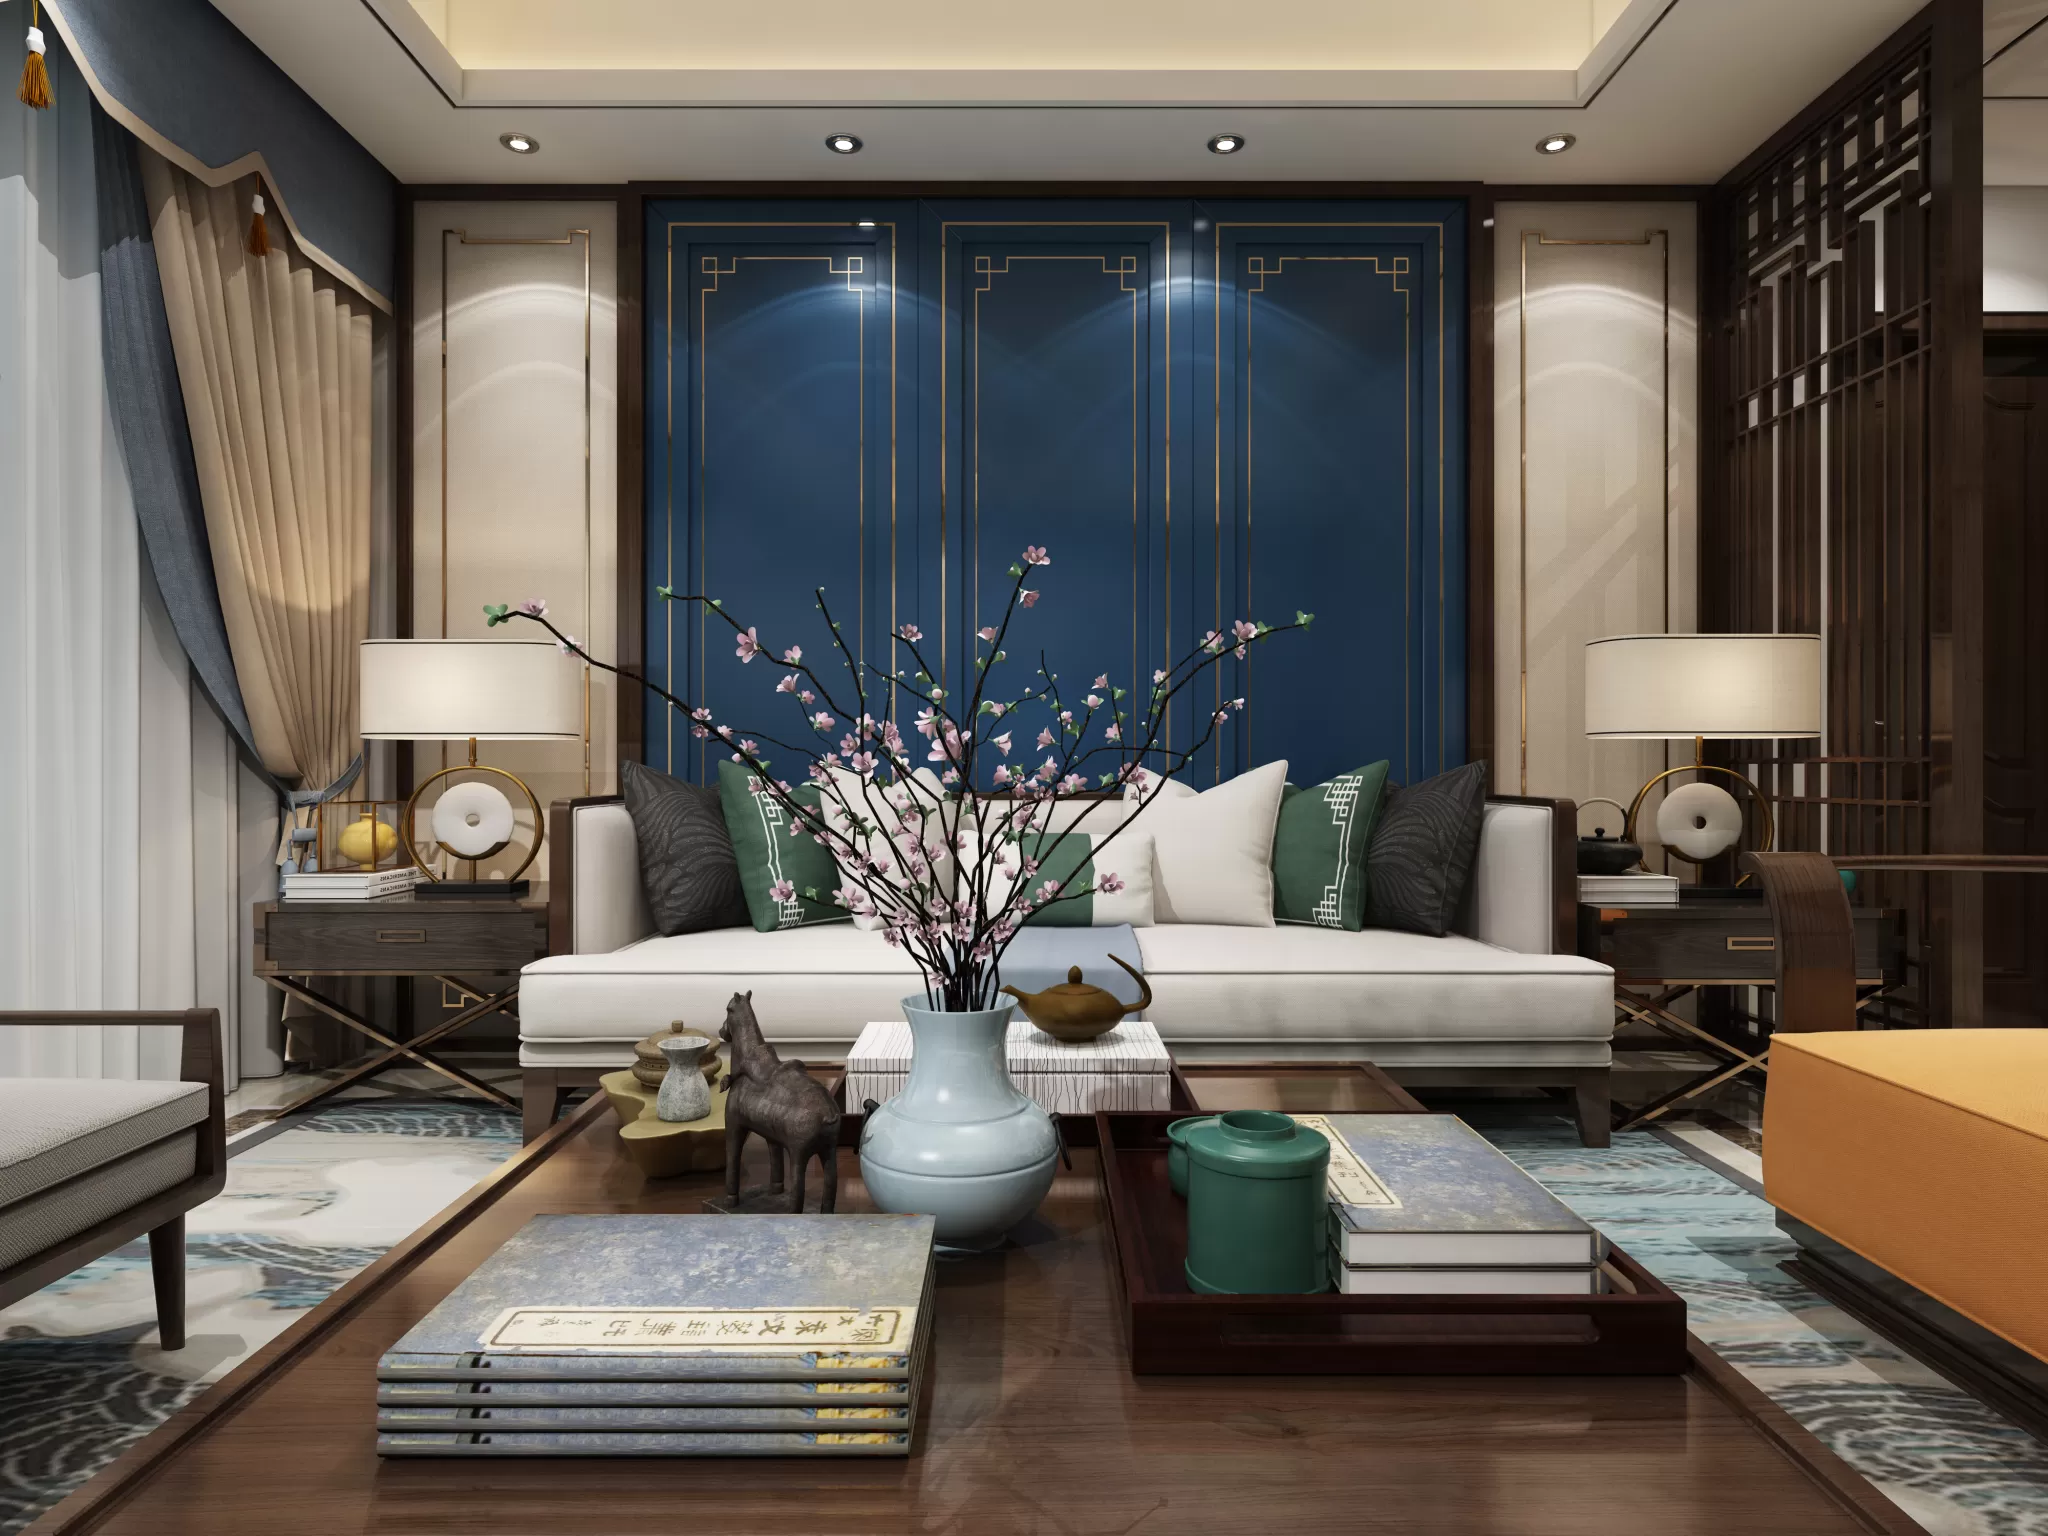 DESMOD INTERIOR 2021 (VRAY) – 4. LIVING ROOM – CHINESE – 065